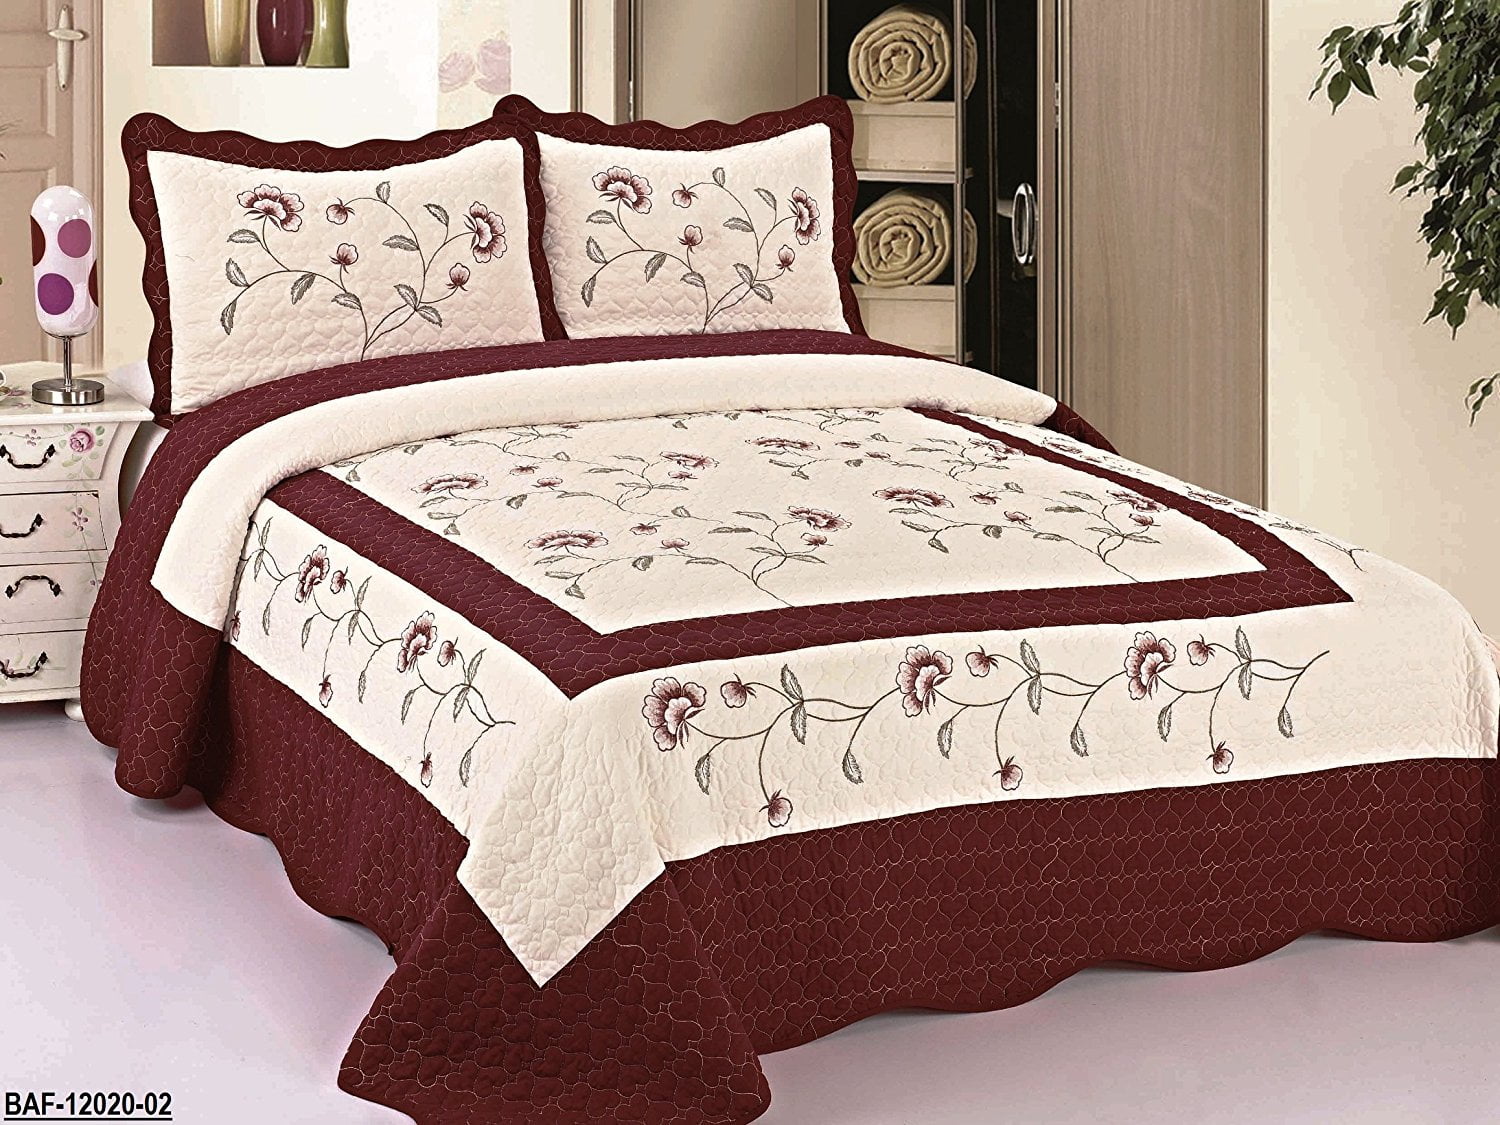 3pcs High Quality Fully Quilted Embroidery Quilts Bedspread Bed ...